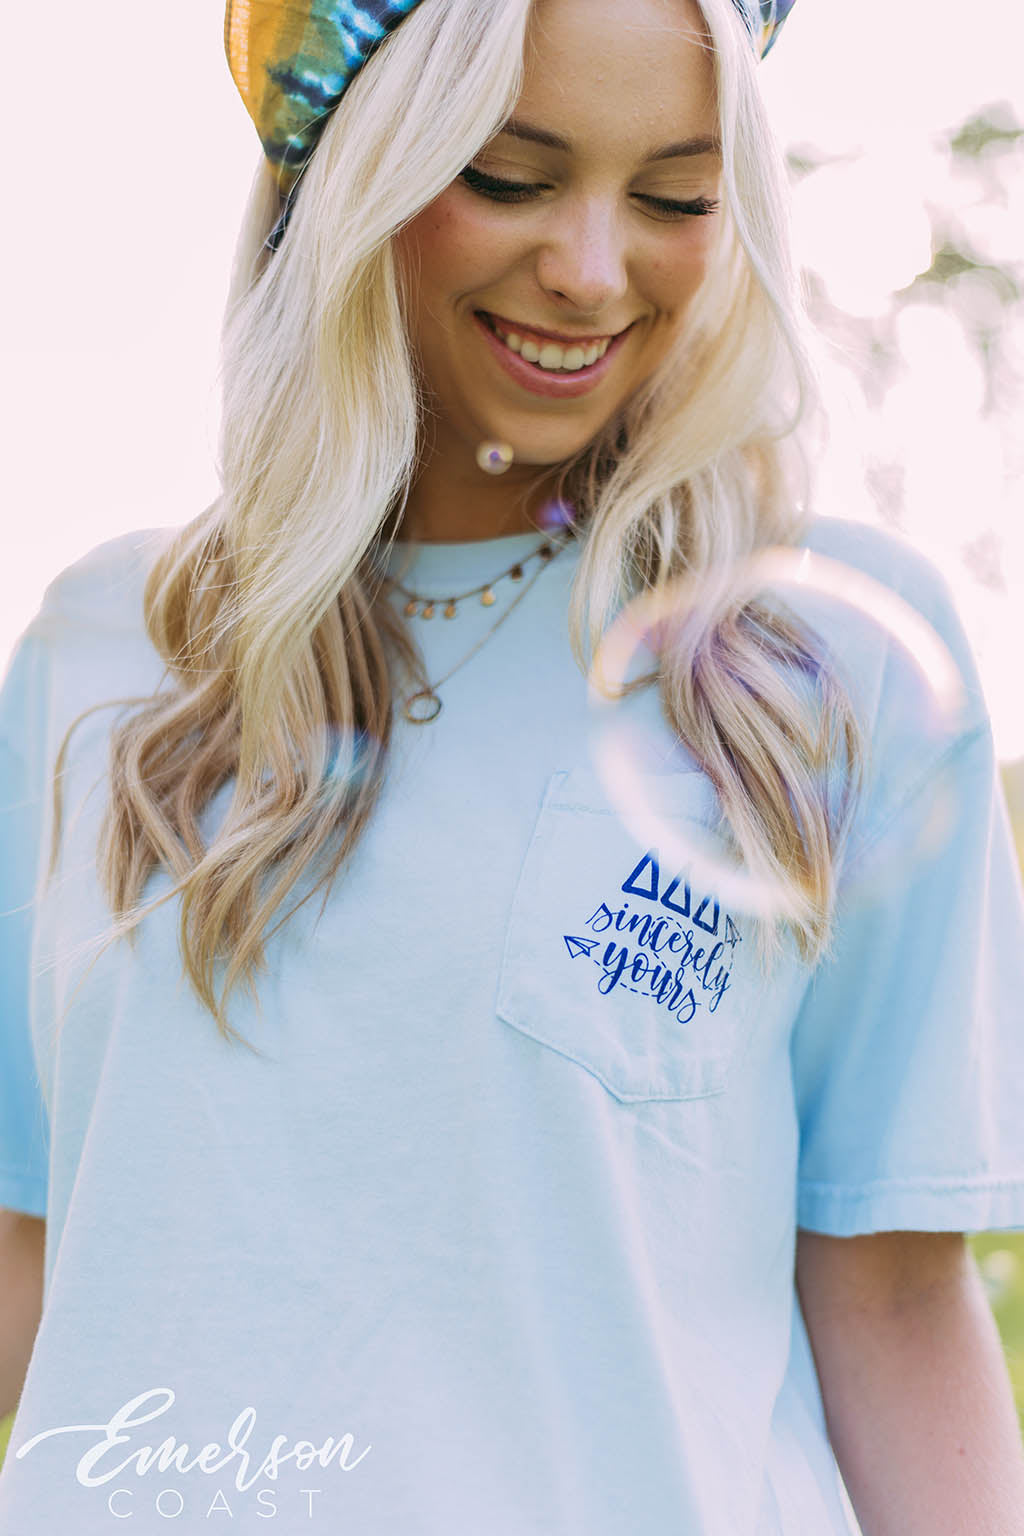 Tri Delta Sincerely Yours St Jude Tee